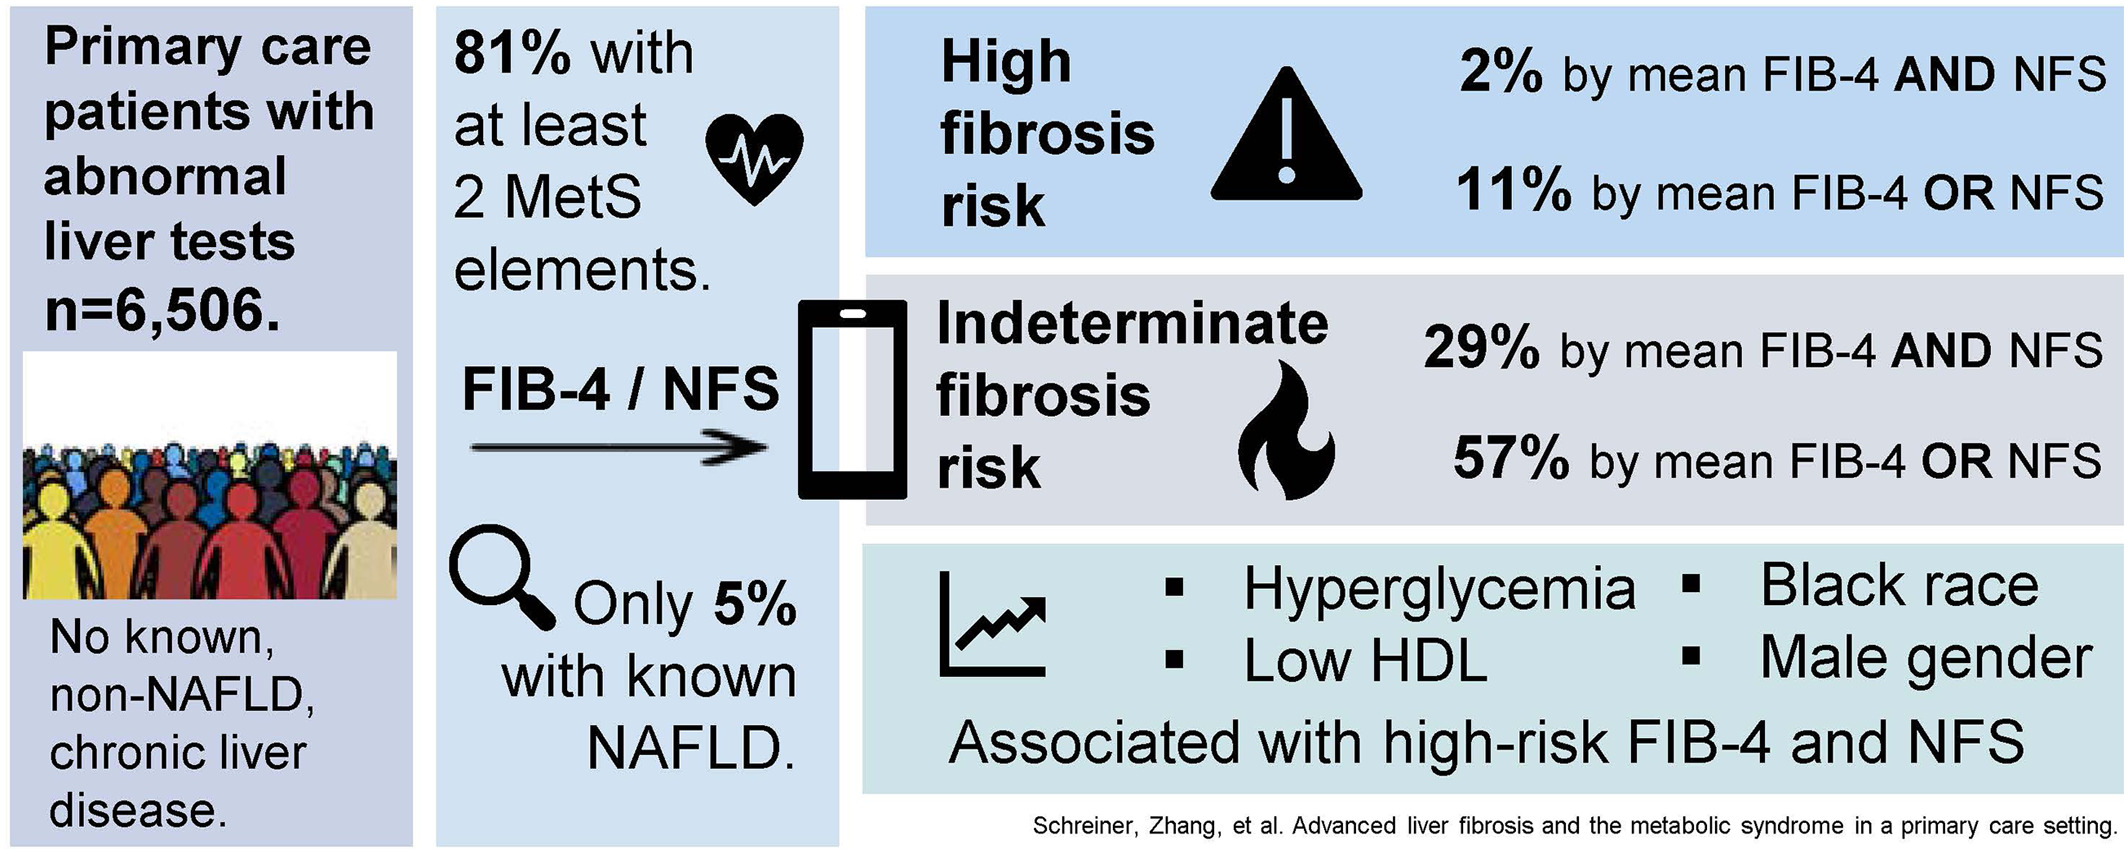 Advanced liver fibrosis and the metabolic syndrome in a primary care setting